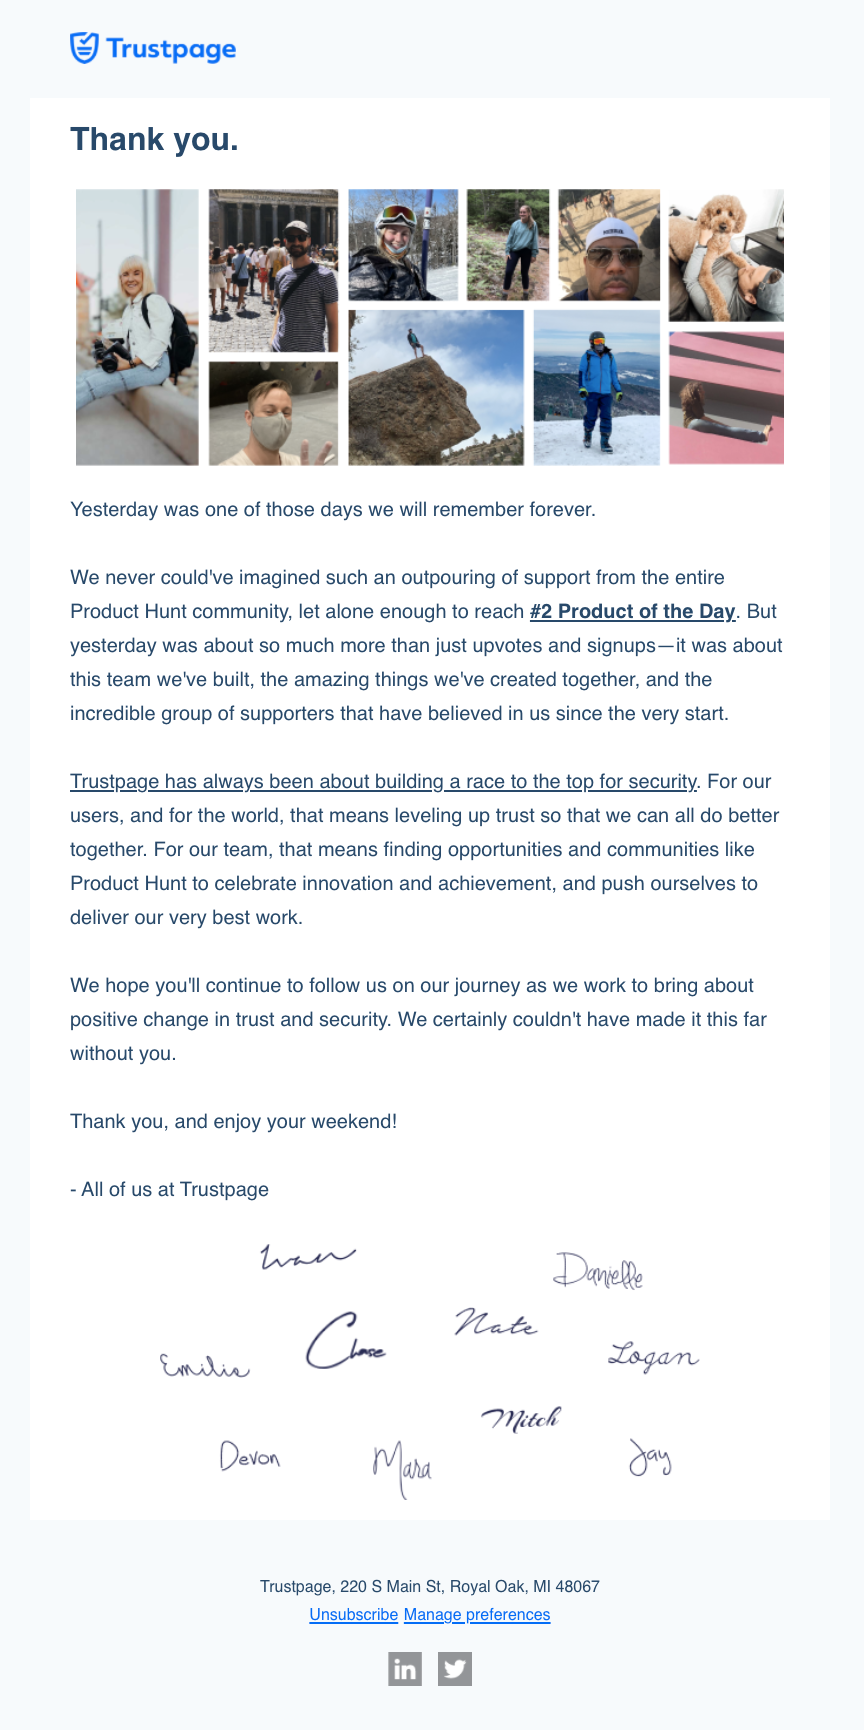 Thank you email from the Trustpage team sent post-product hunt. 